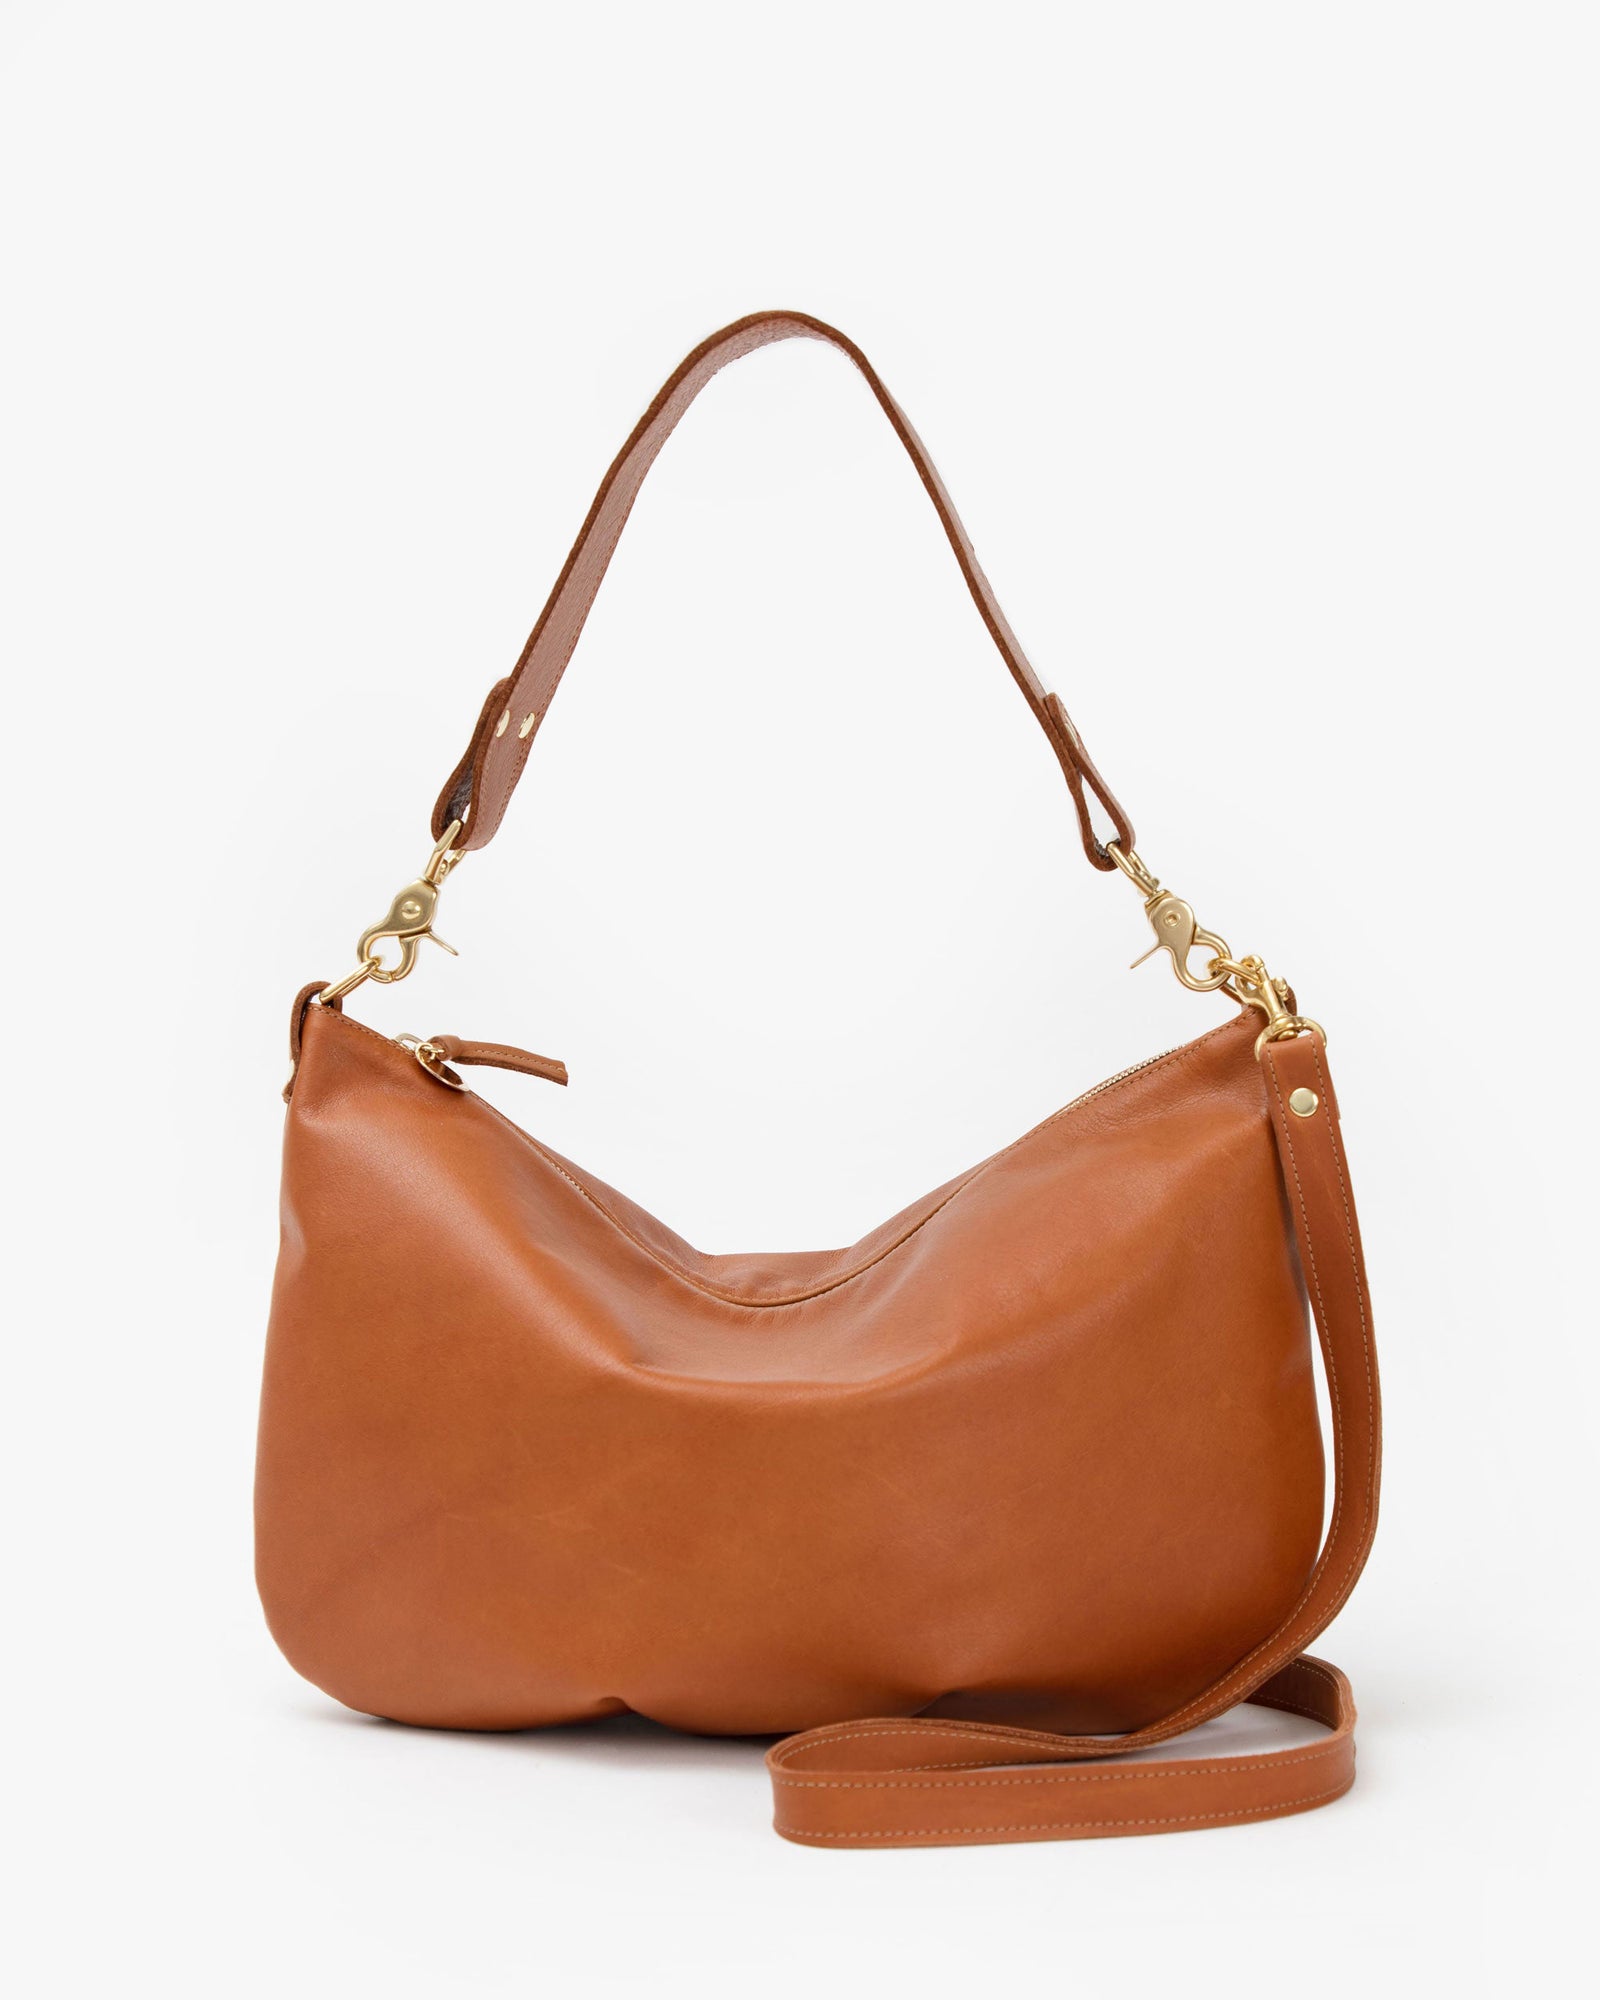 Clare V. Leather Fanny Pack in Tan Neptune